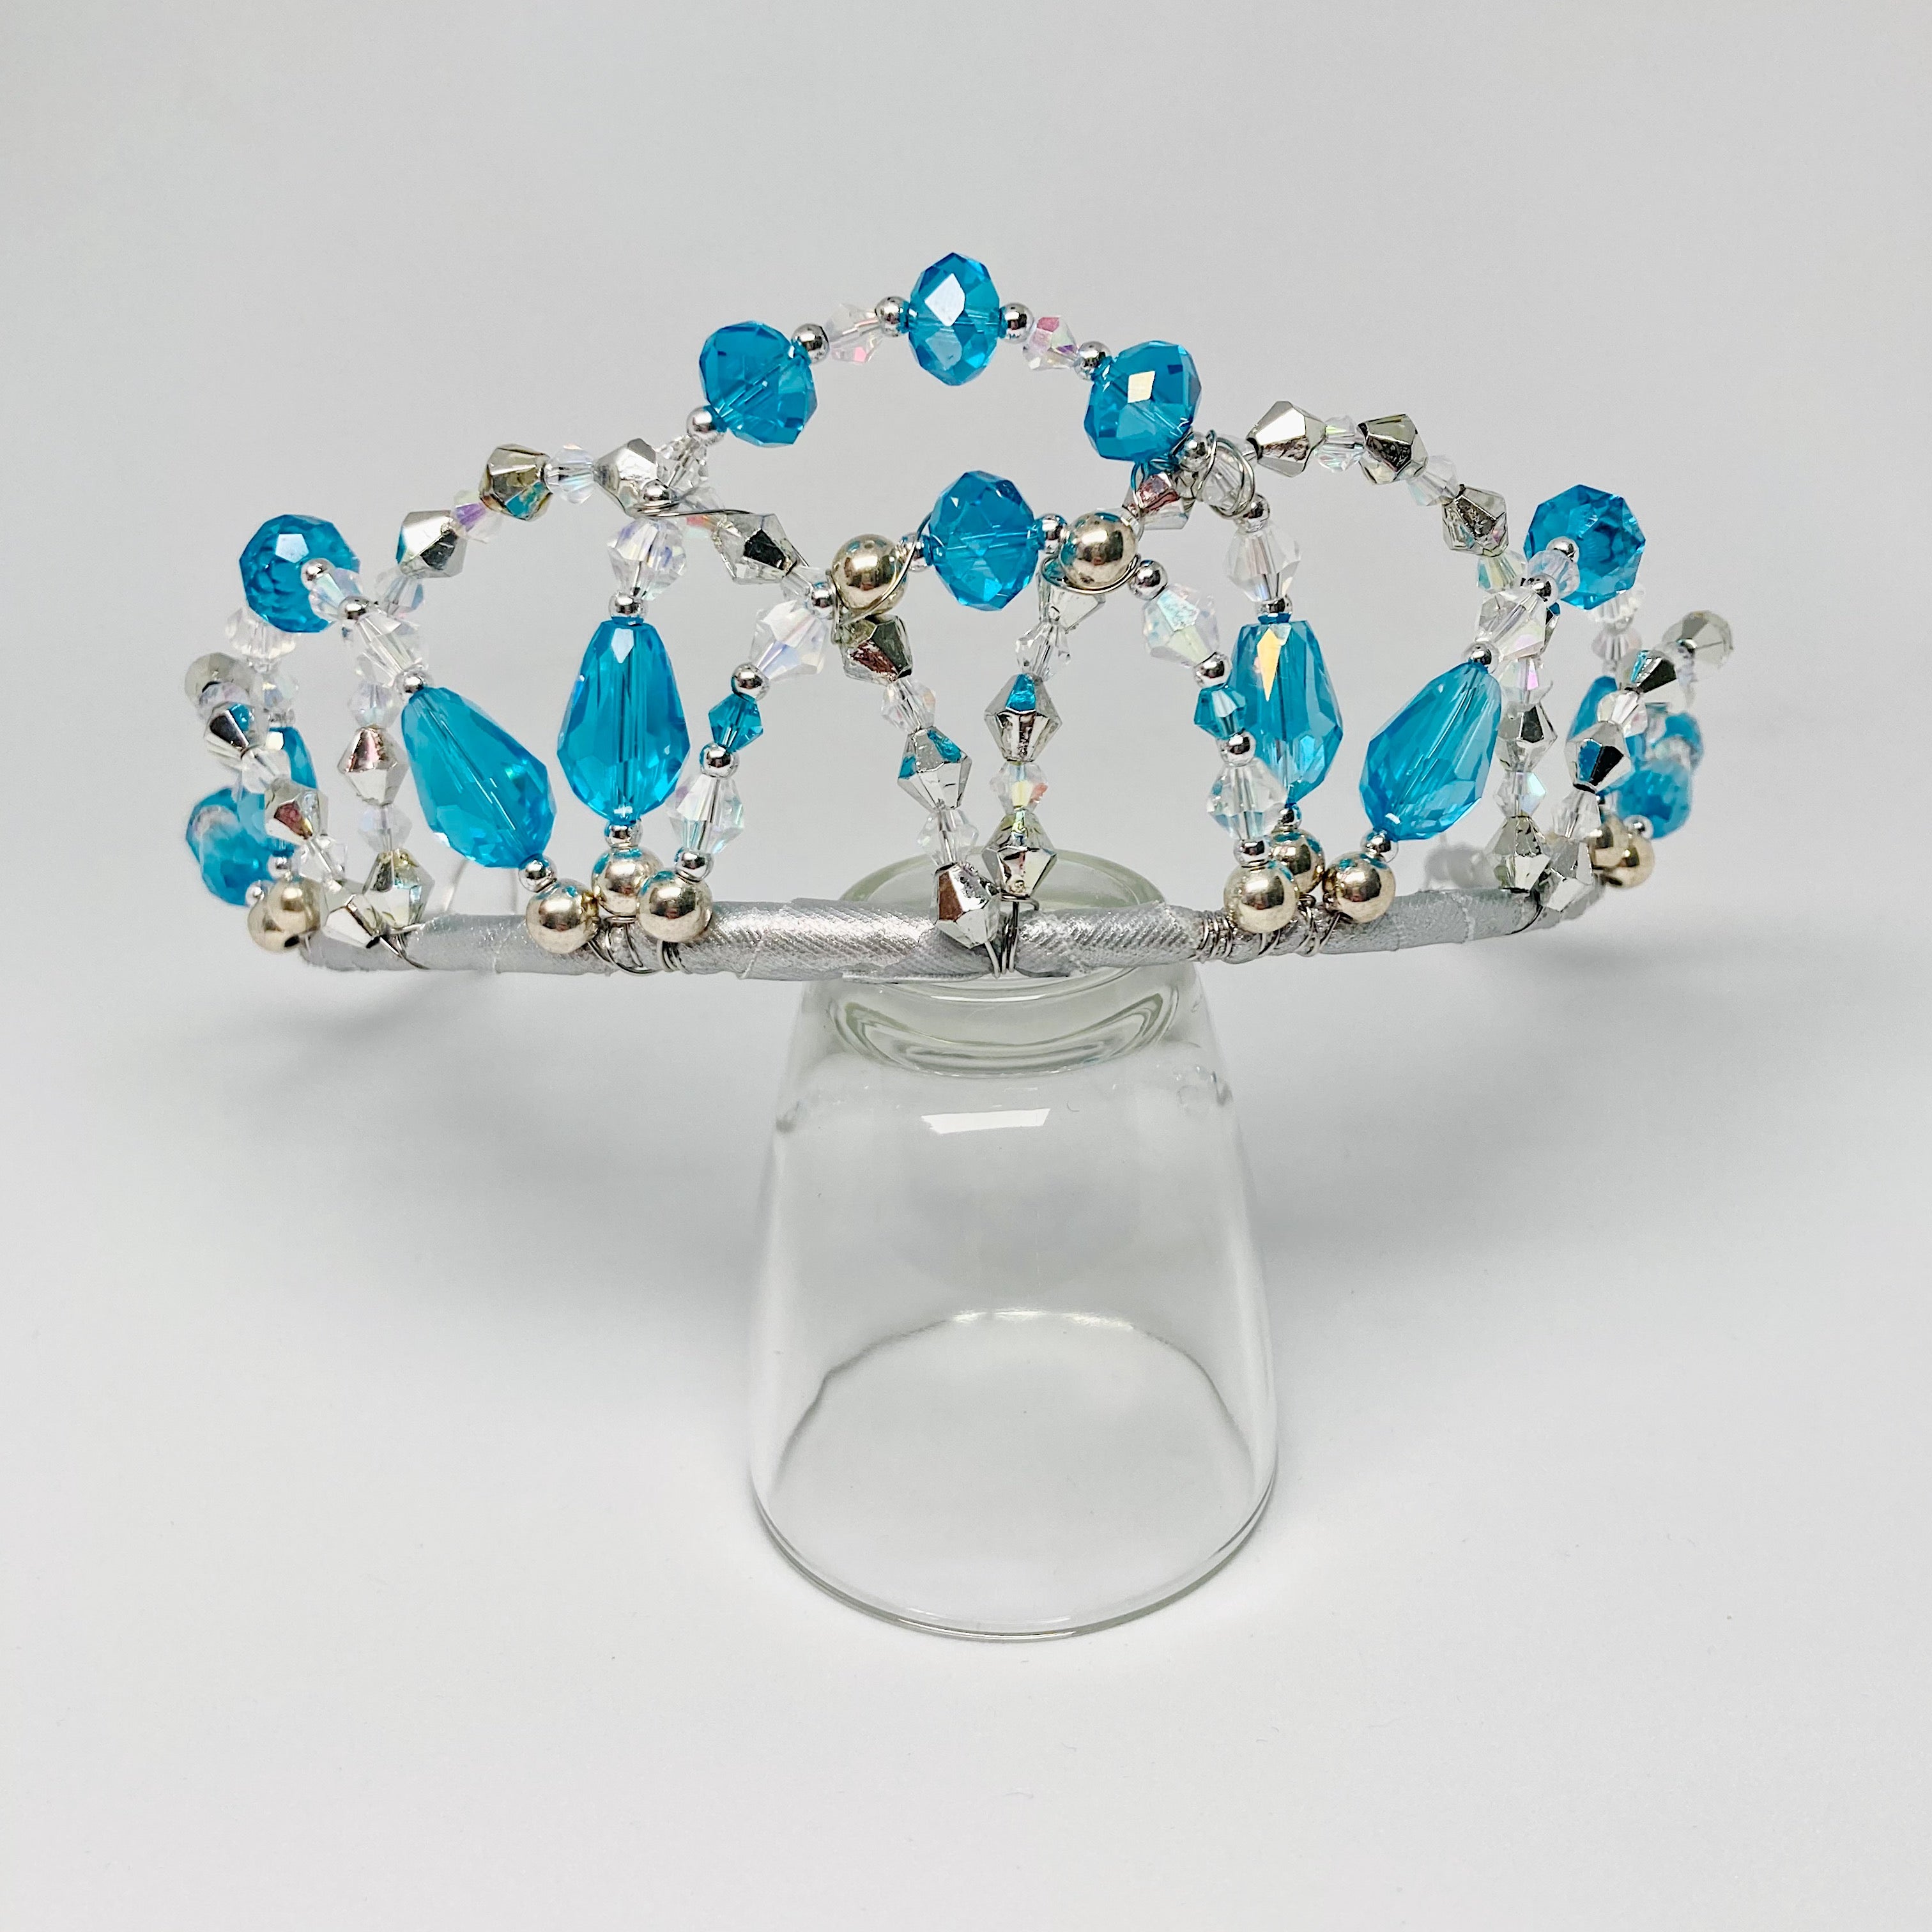 Tiara featuring aqua blue and clear crystals and silver bicone and round beads.  Tiara is displayed on a clear glass.